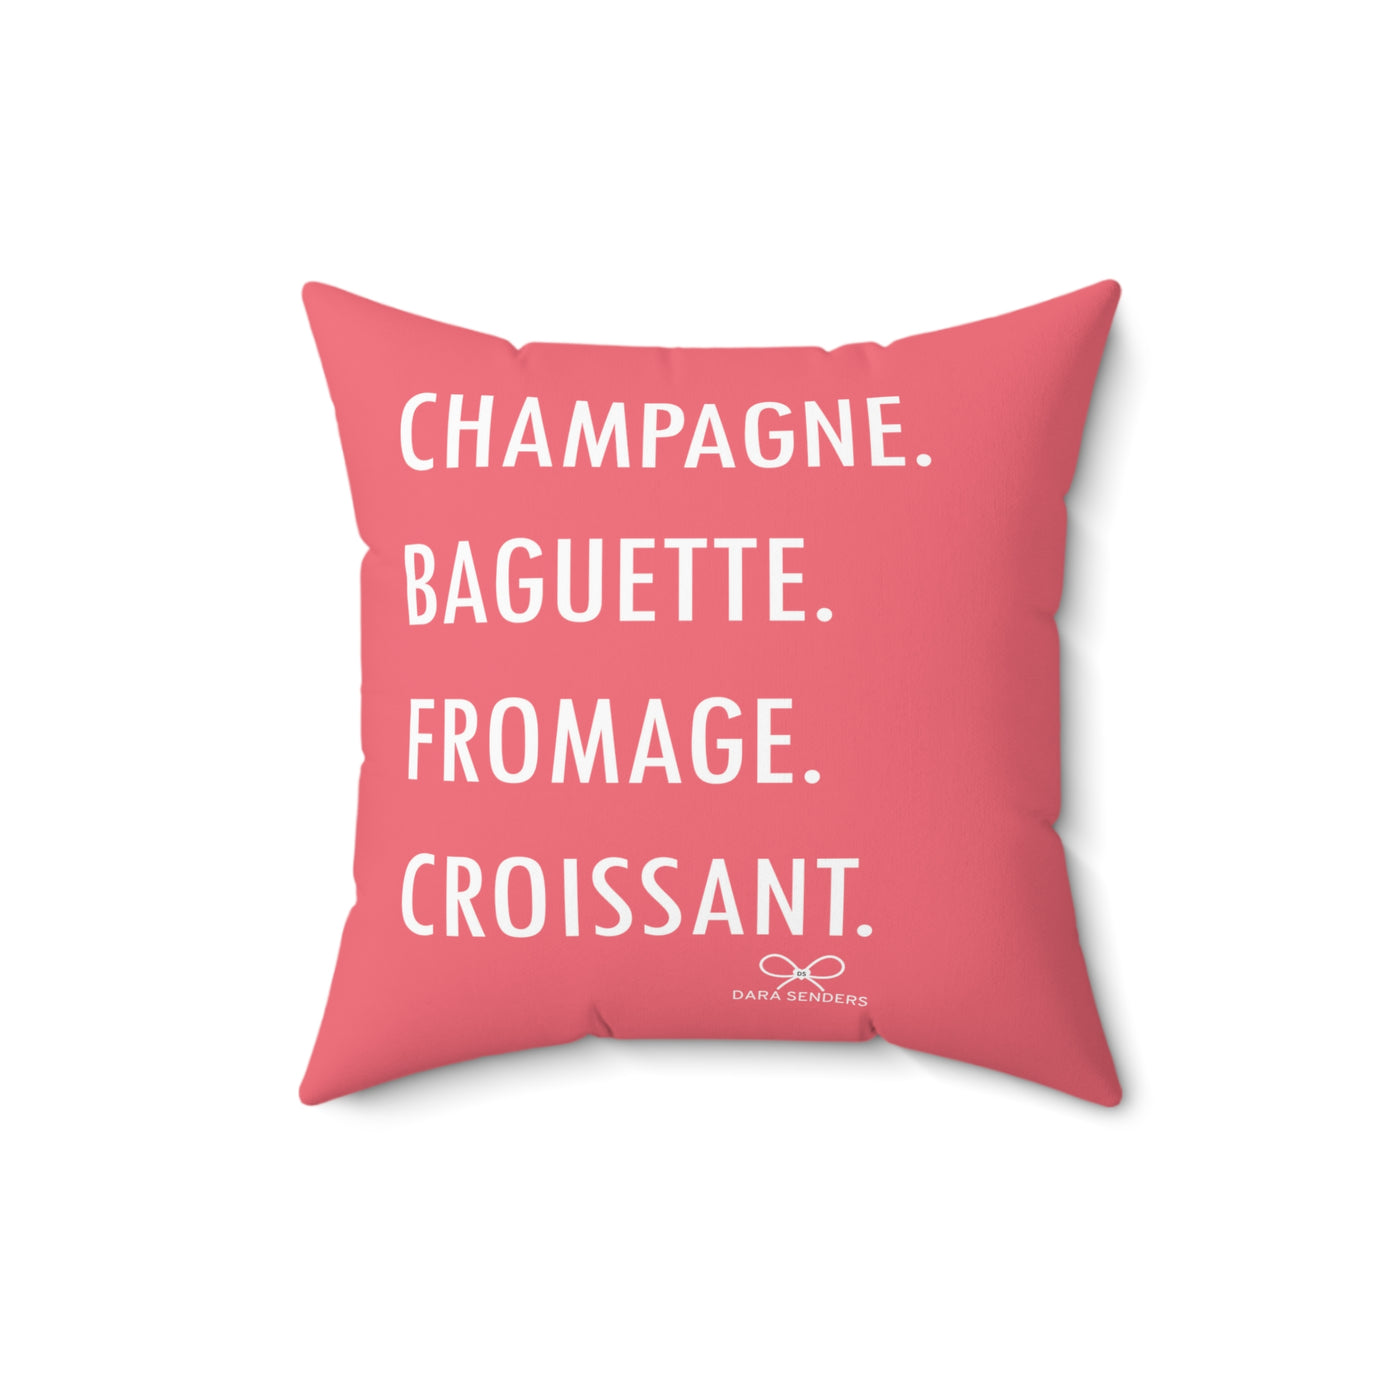 GOURMET LOVE PILLOW Faux Suede (Champagne, Baguette, Fromage, Croissant) - PInk - NEWS 12 EXCLUSIVE